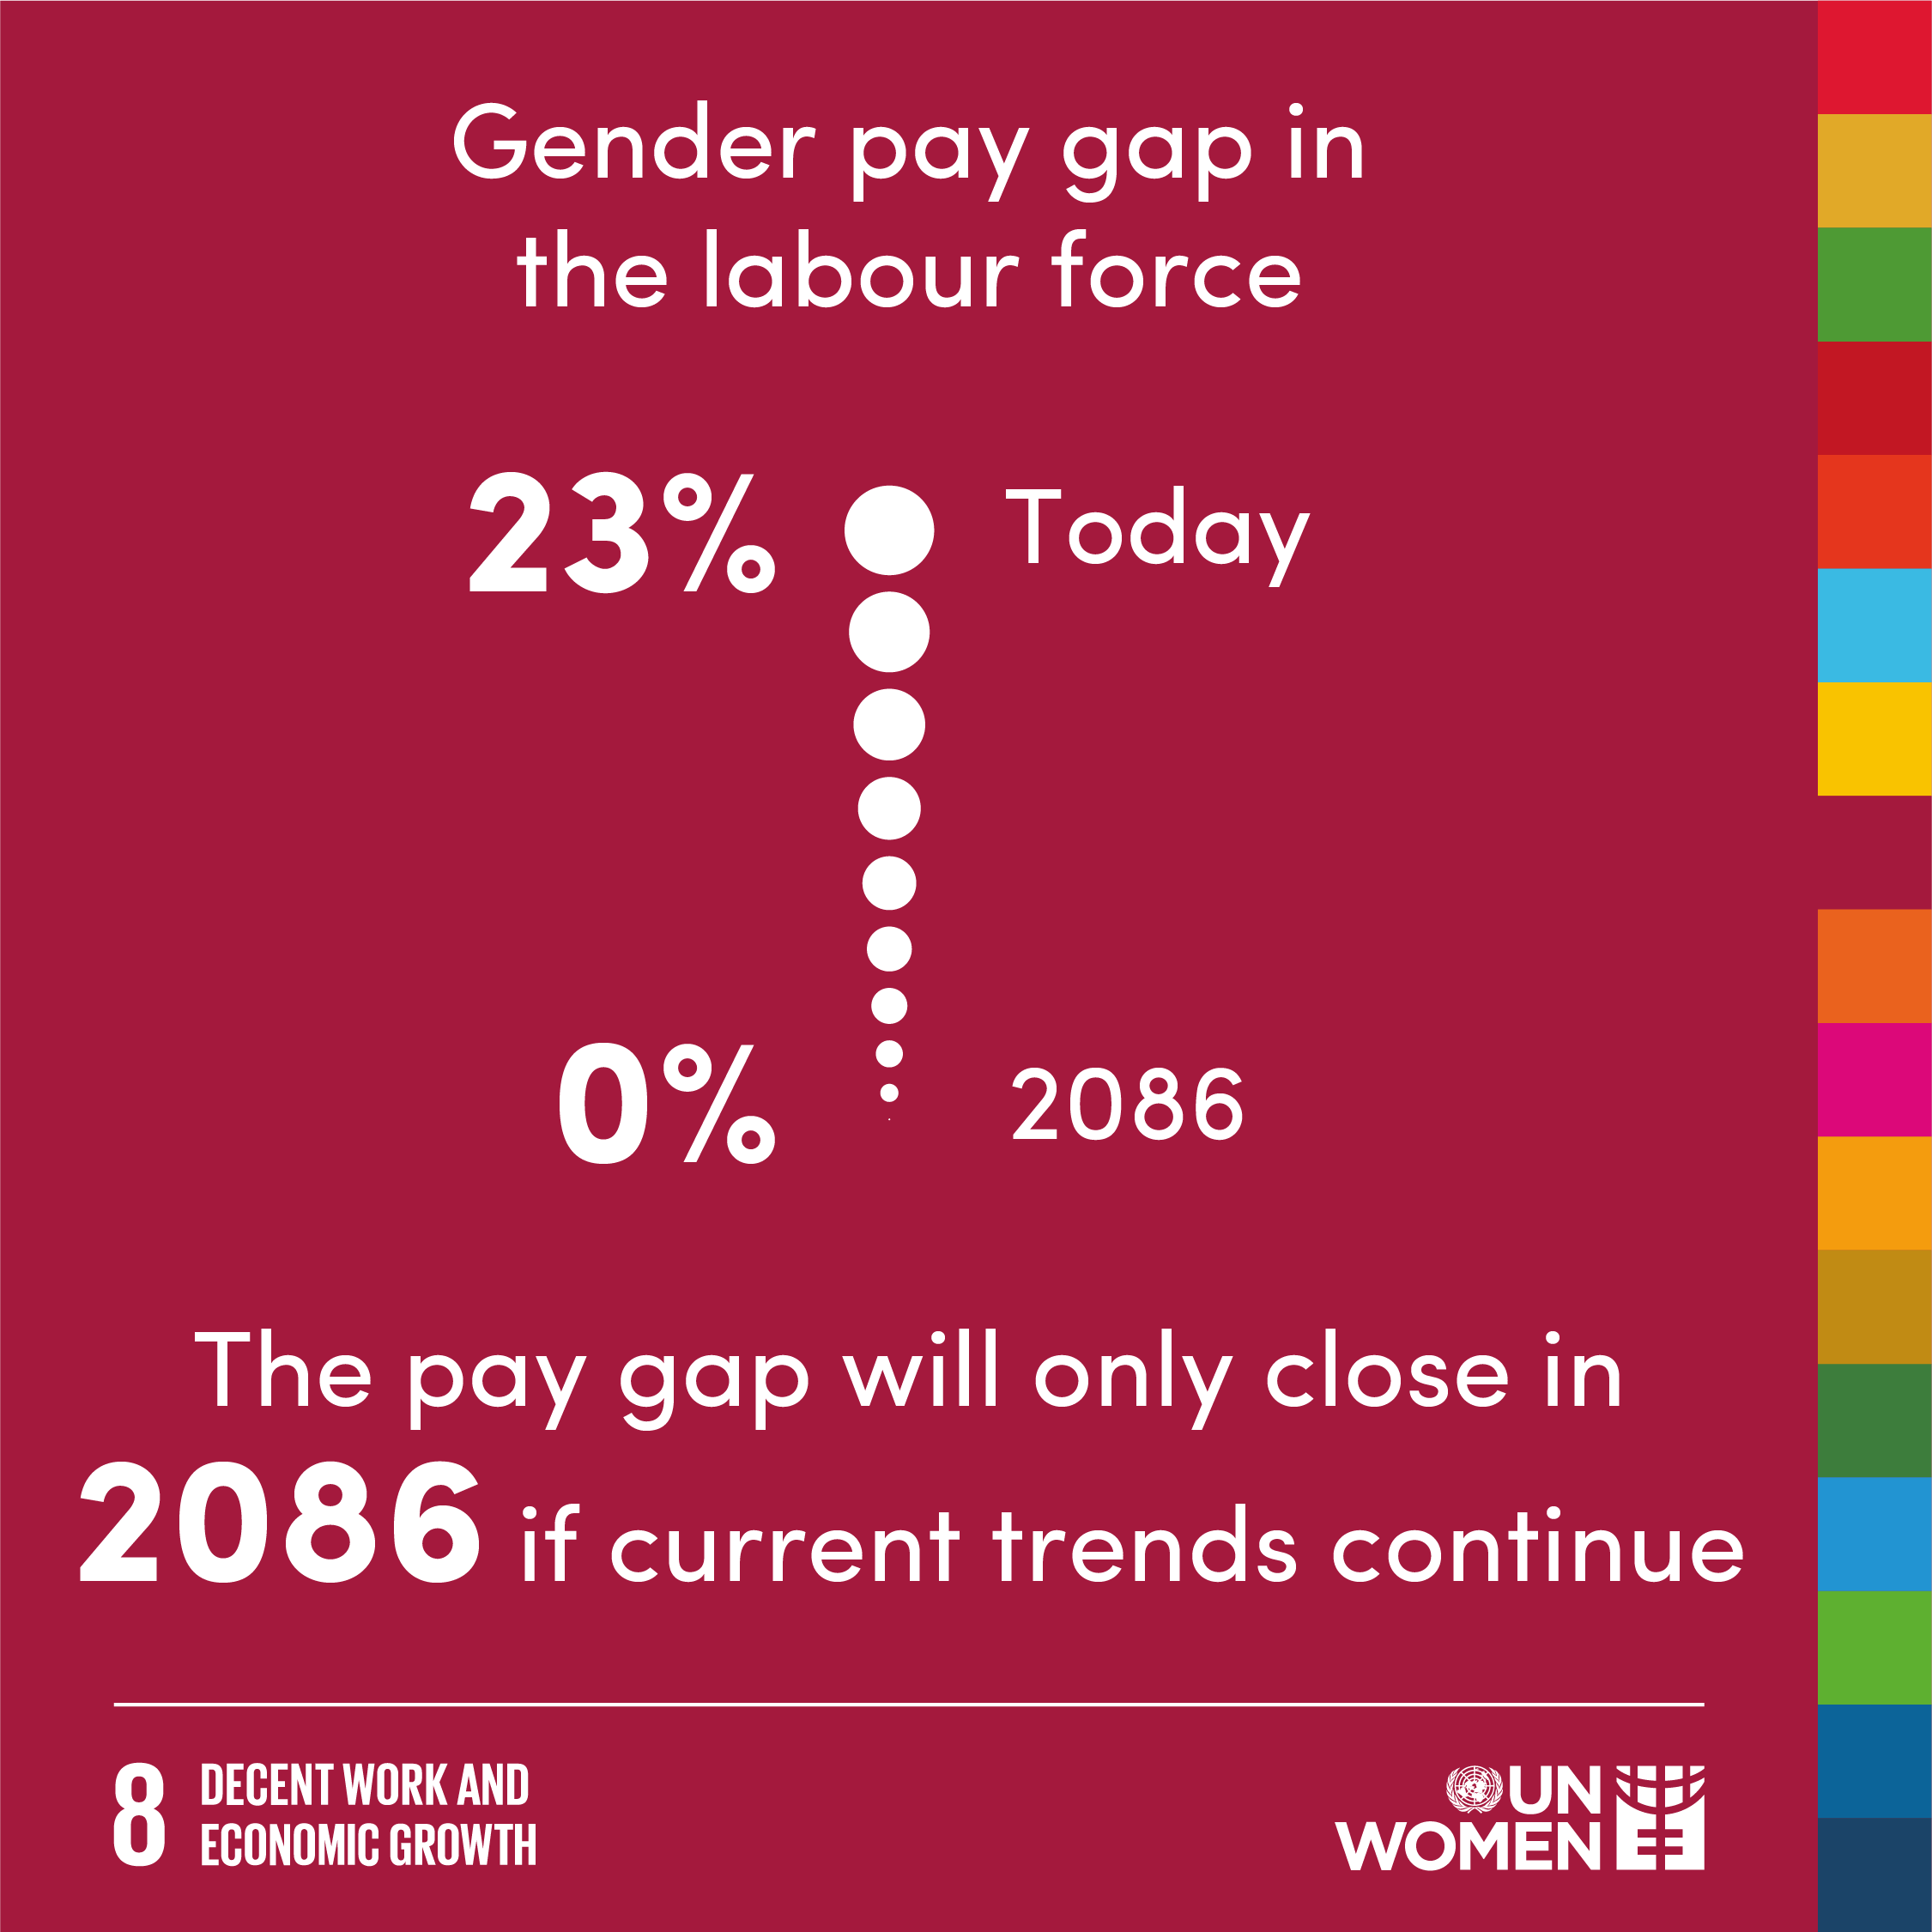 The gender pay gap in the labour force will only close in 2086 if current trends continue. 